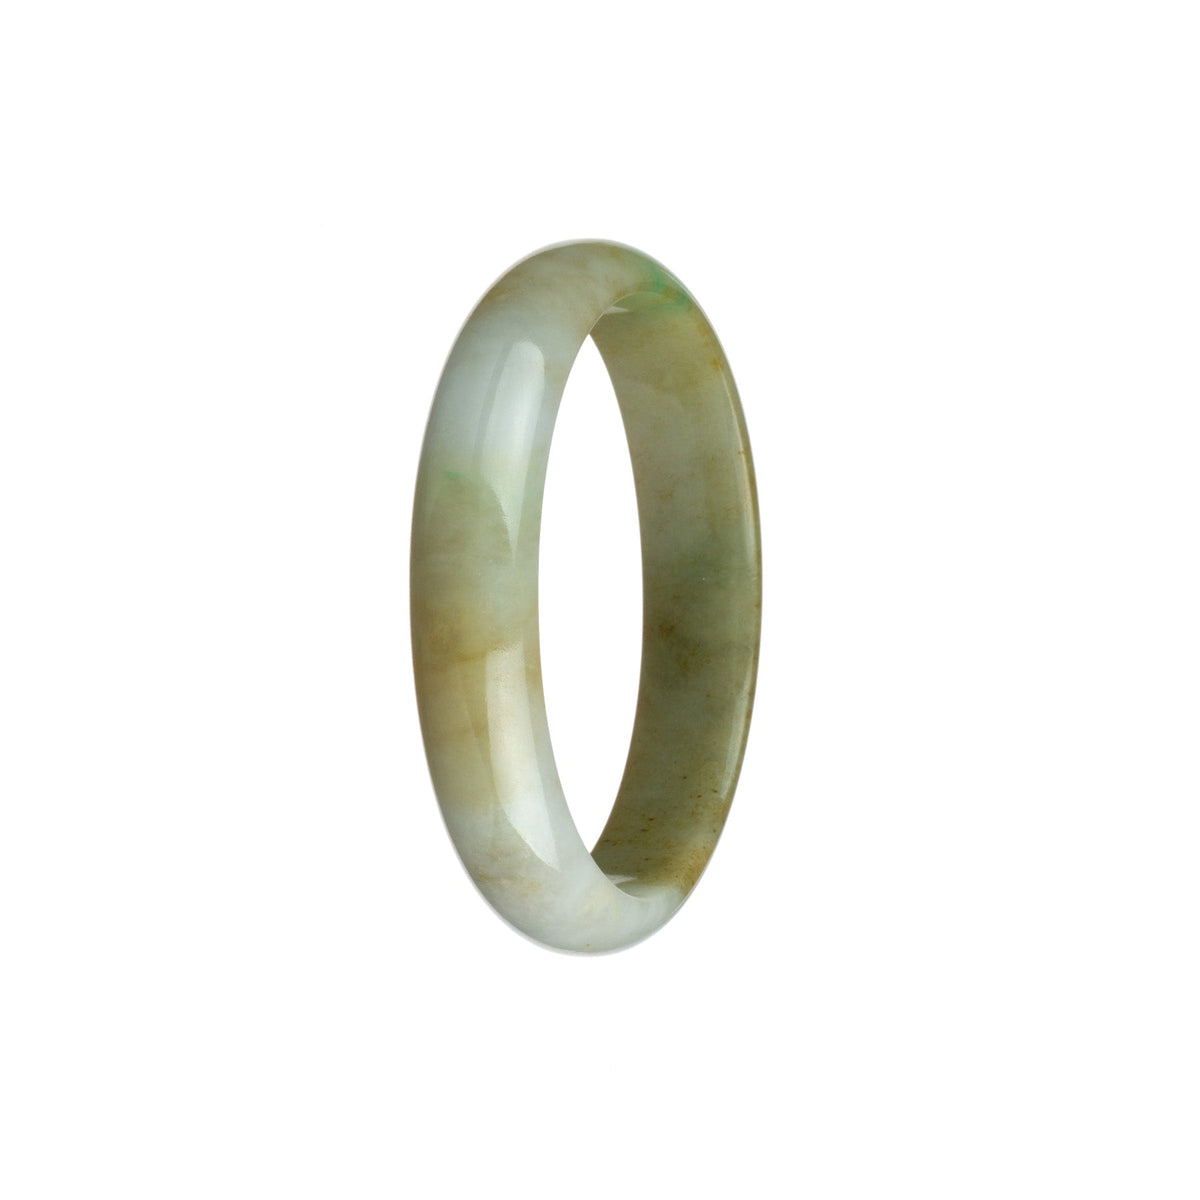 A beautiful oval-shaped jadeite bangle with a natural, untreated yellowish brown color. The bangle features stunning white and green hues, adding a touch of elegance to any outfit. Measures 54mm in diameter. Created by MAYS.